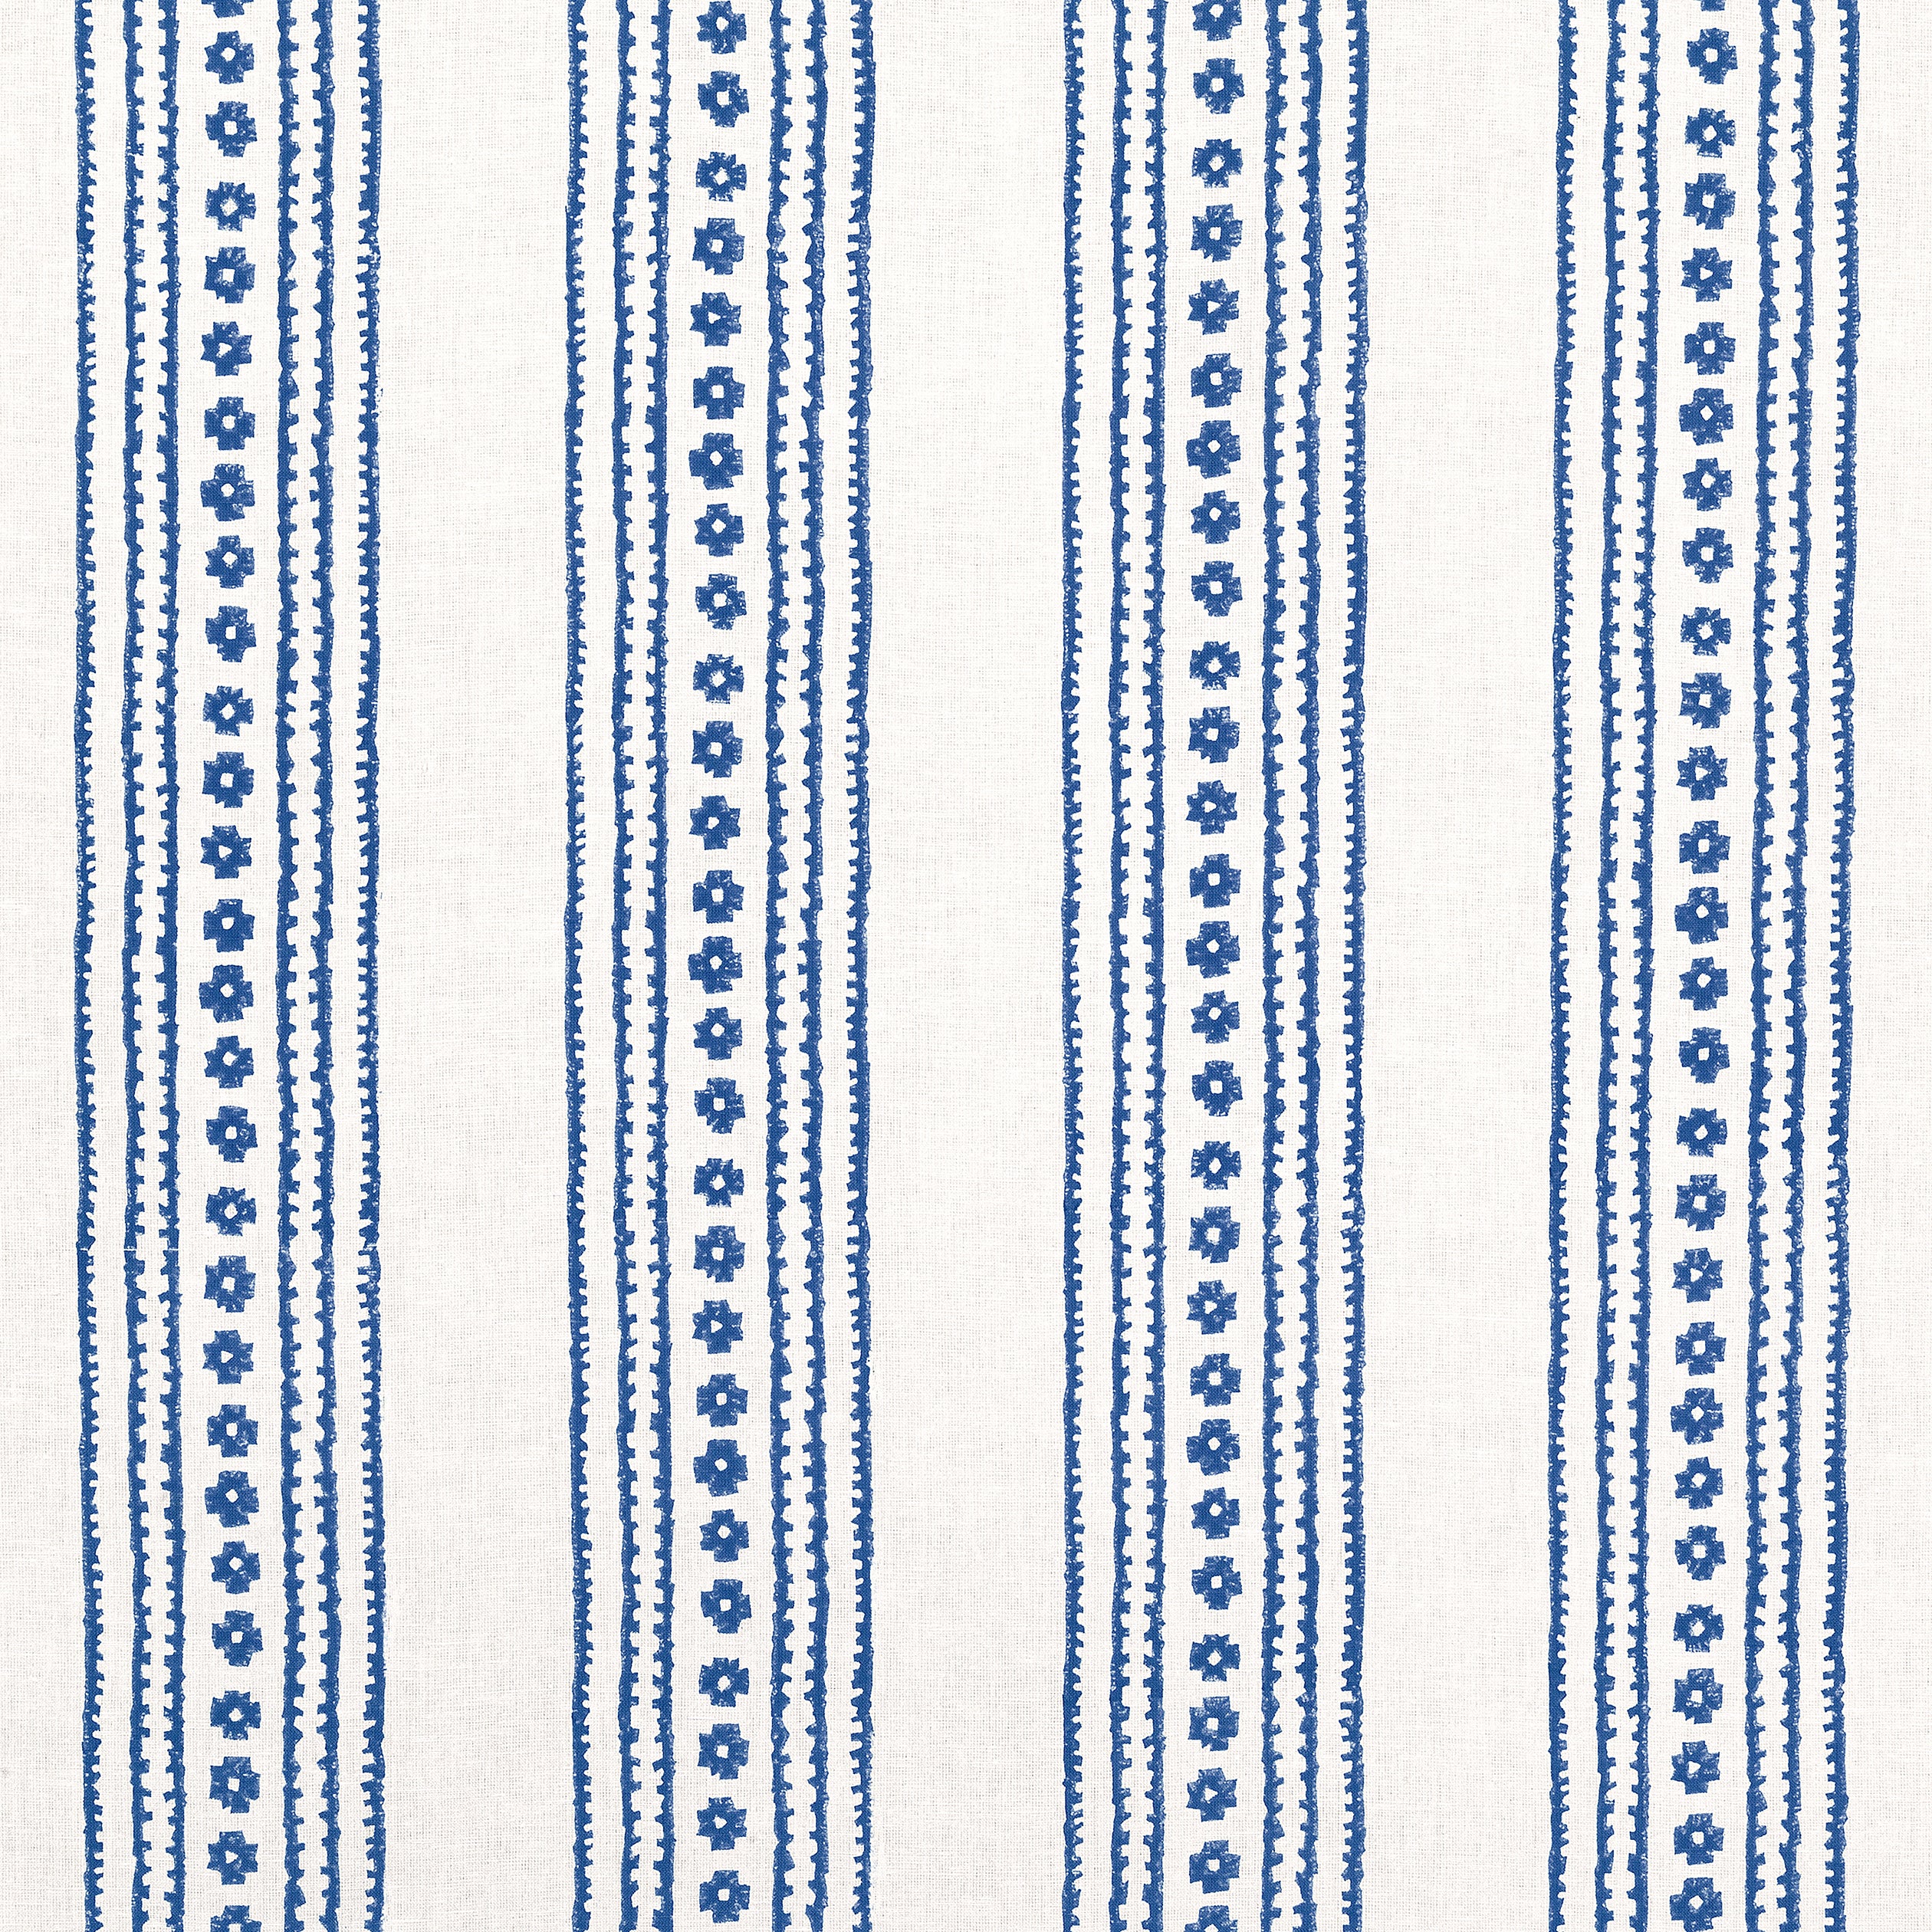 New Haven Stripe fabric in navy color - pattern number F910608 - by Thibaut in the Ceylon collection